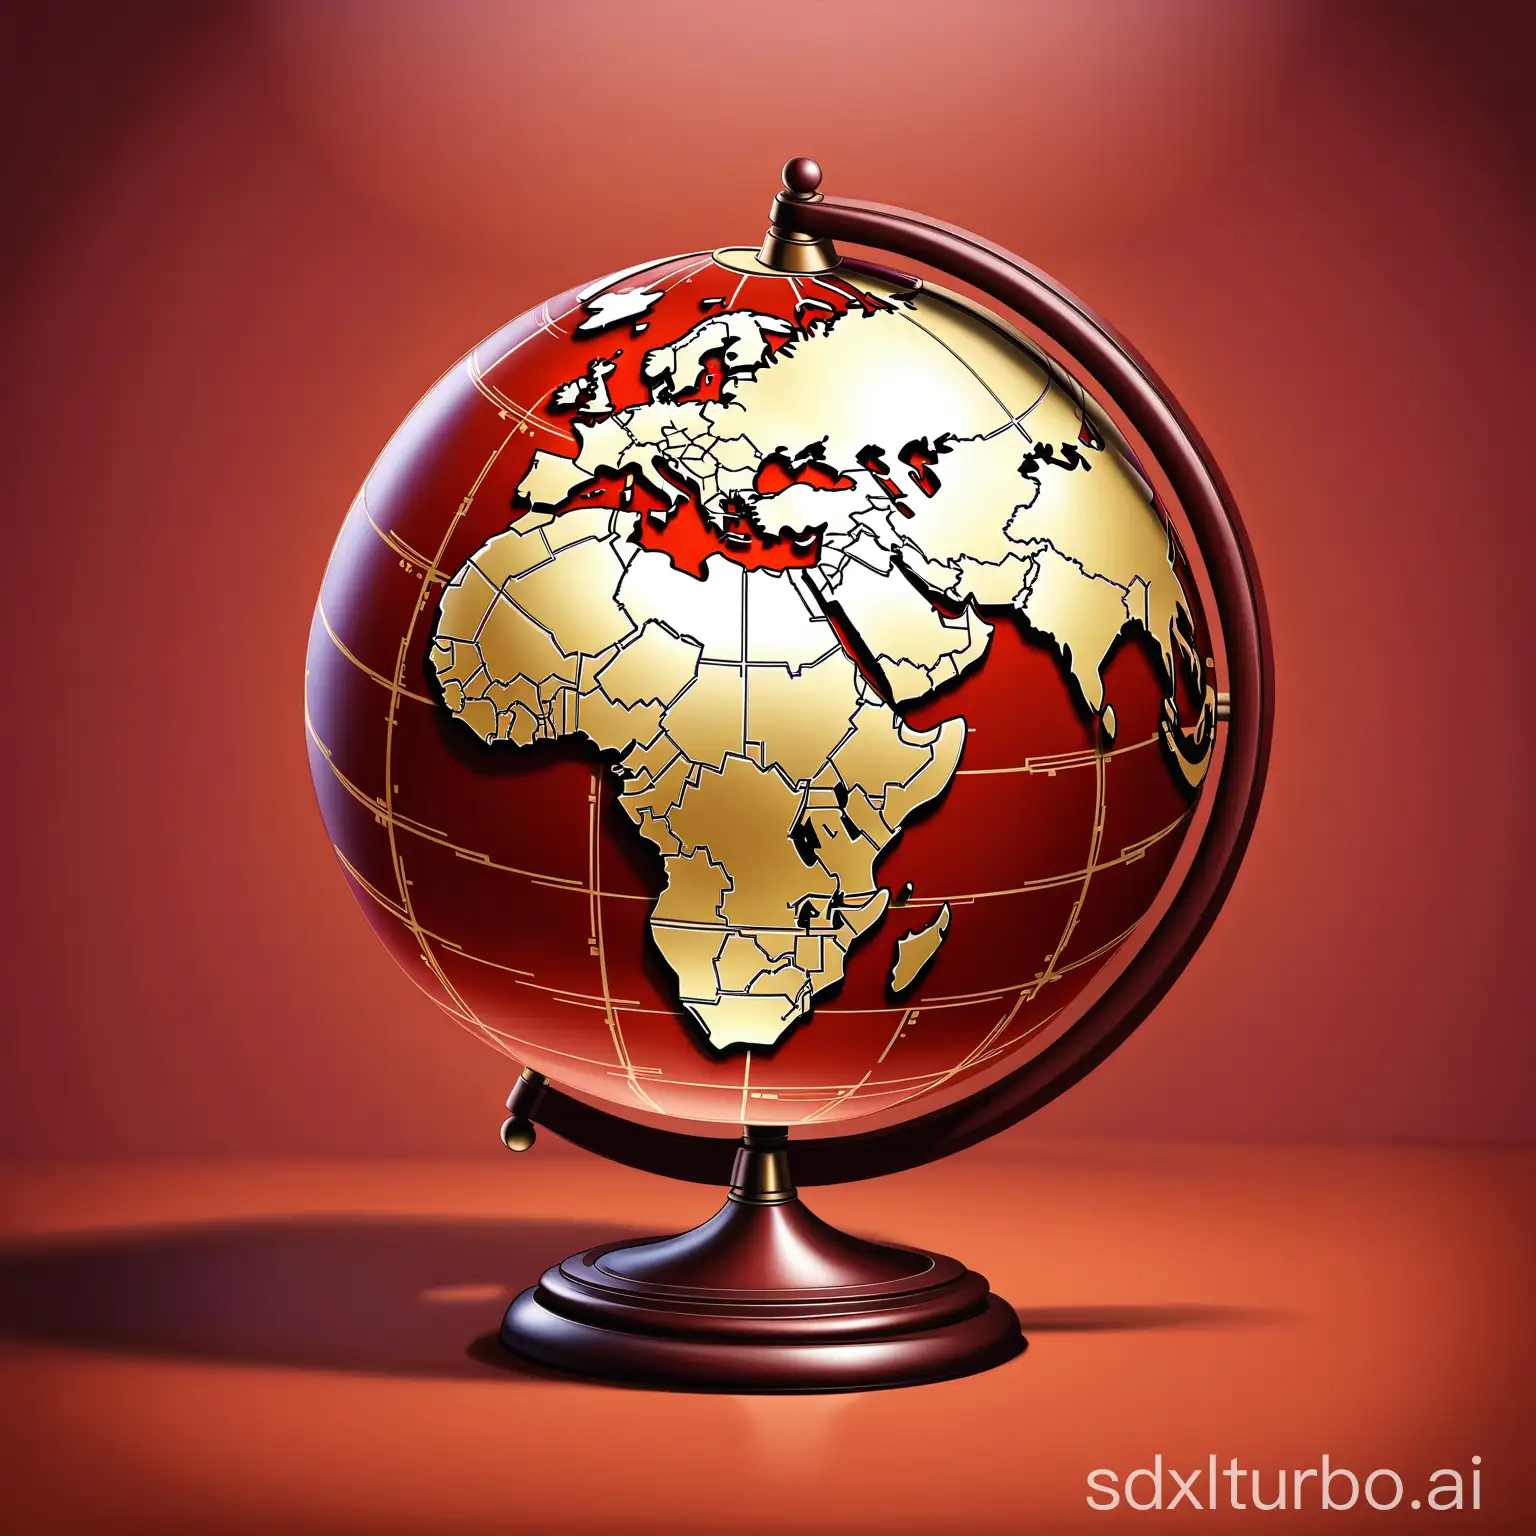 red antique globe showing the world